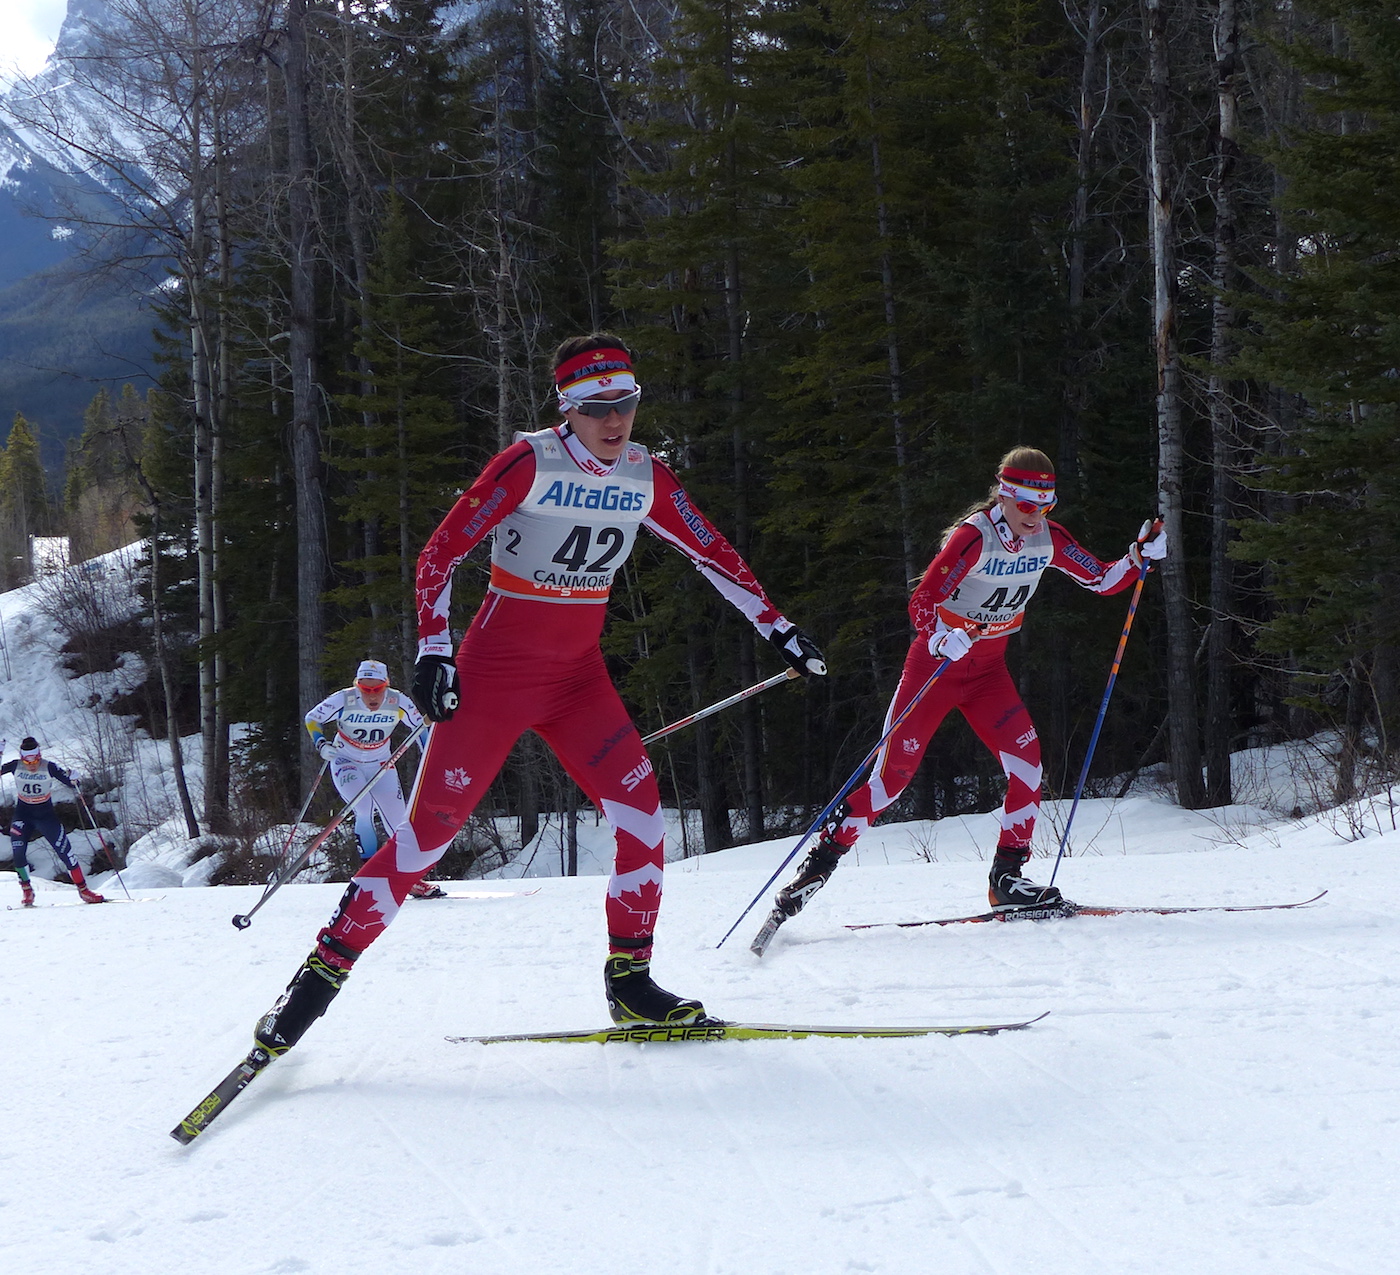 Browne (right) chasing teammate Emily Nishikawa in the 15 k skiathlon in Canmore, Alberta, as part of the Ski Tour Canada. (Photo: Peggy Hung)